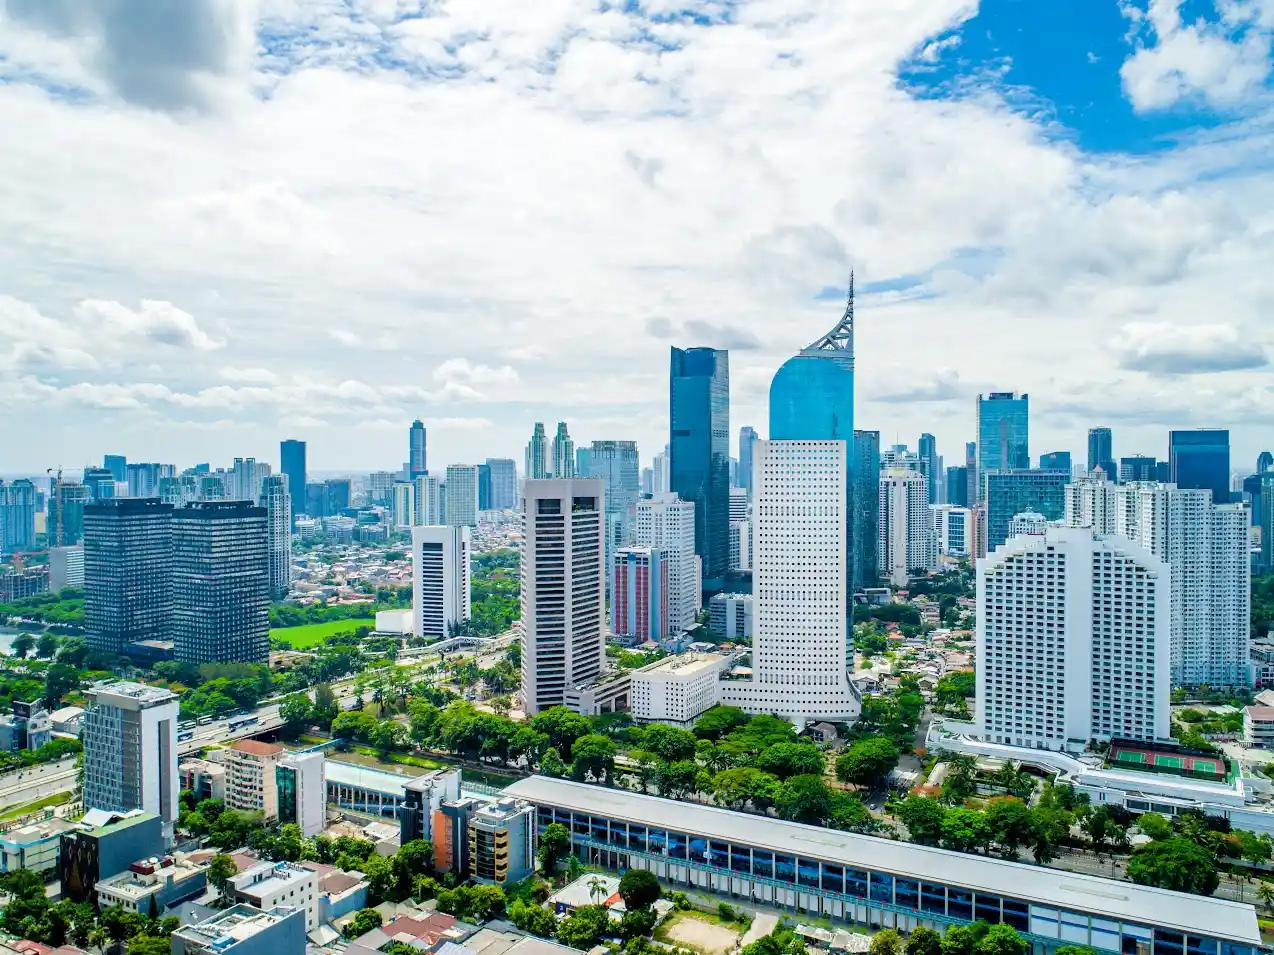 Jakarta - Bustling Capital City with a Mix of Modern and Traditional